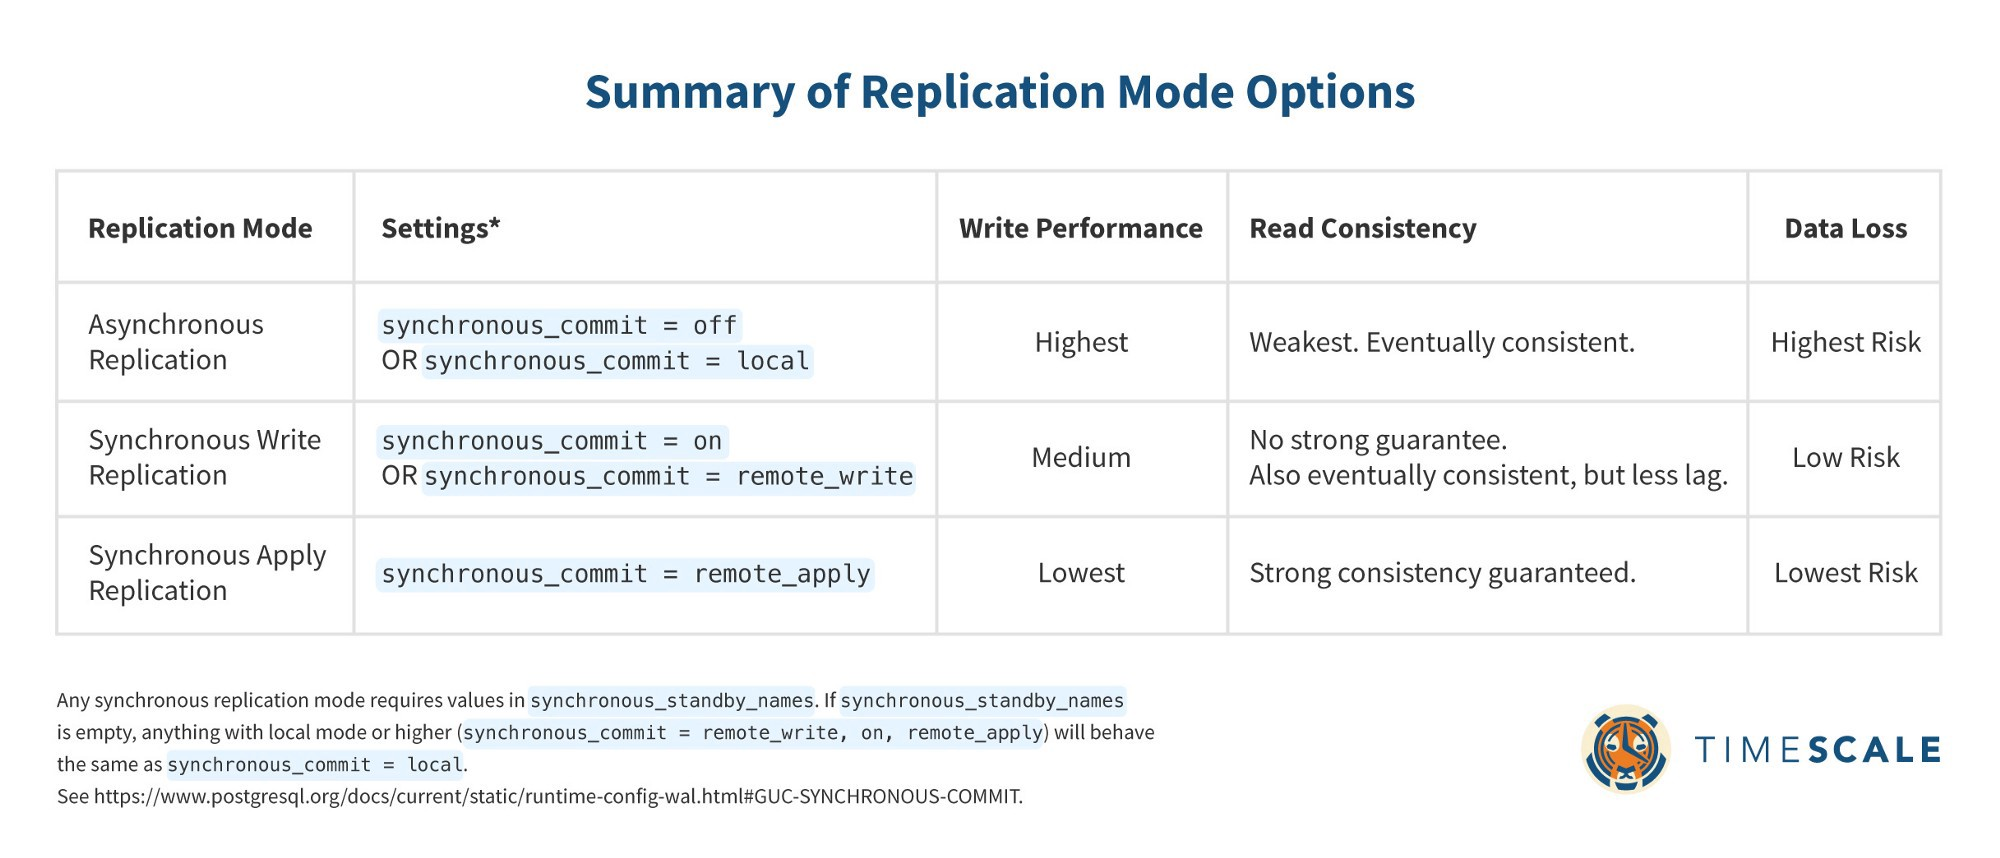 A summary table of replication mode options